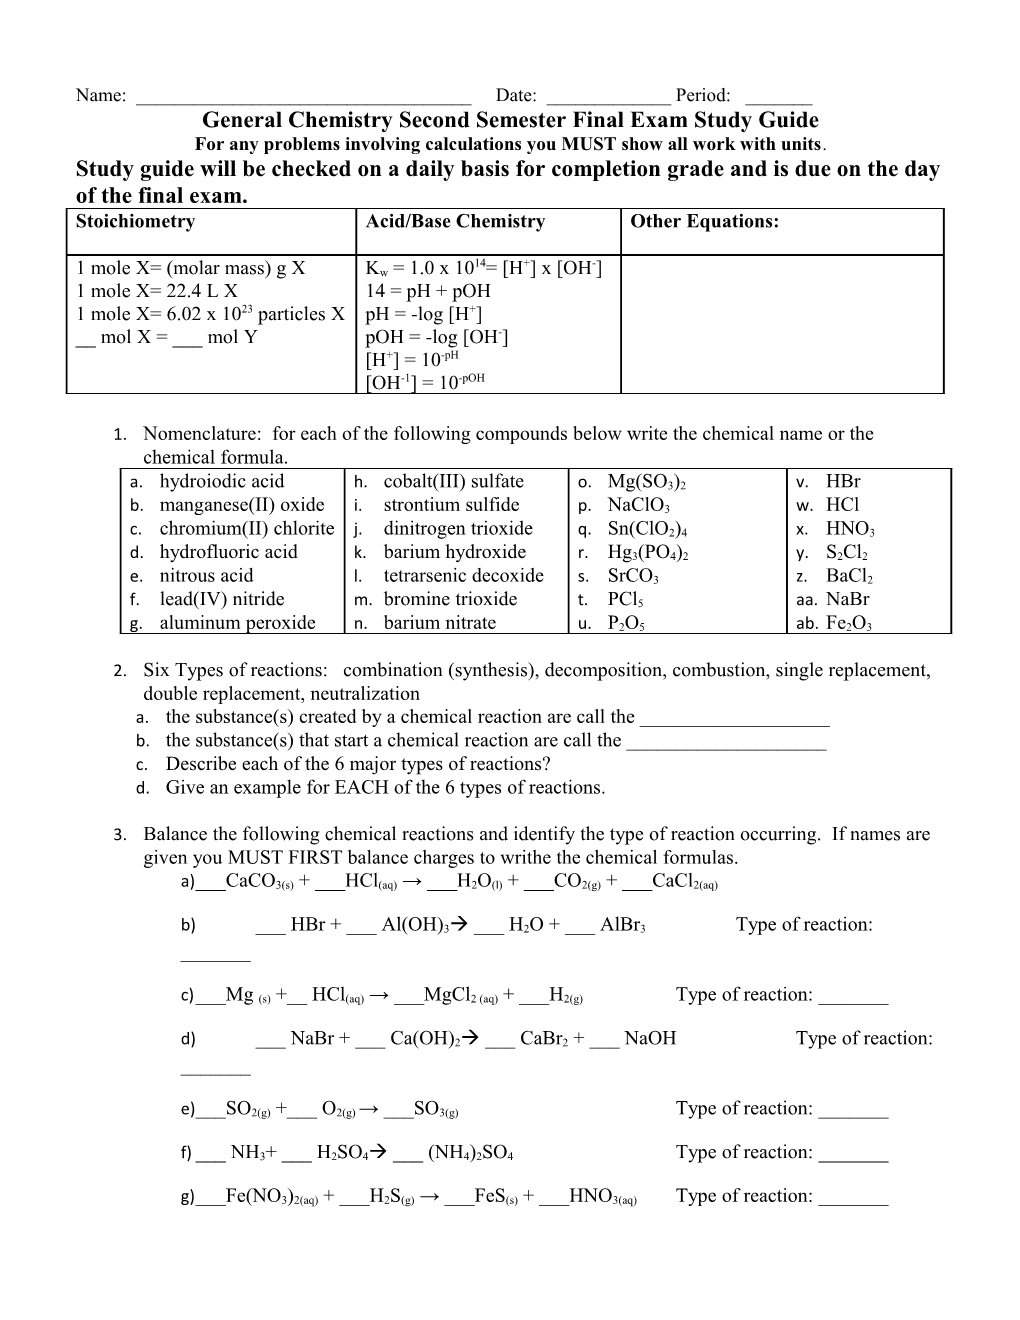 General Chemistry Second Semester Final Exam Study Guide